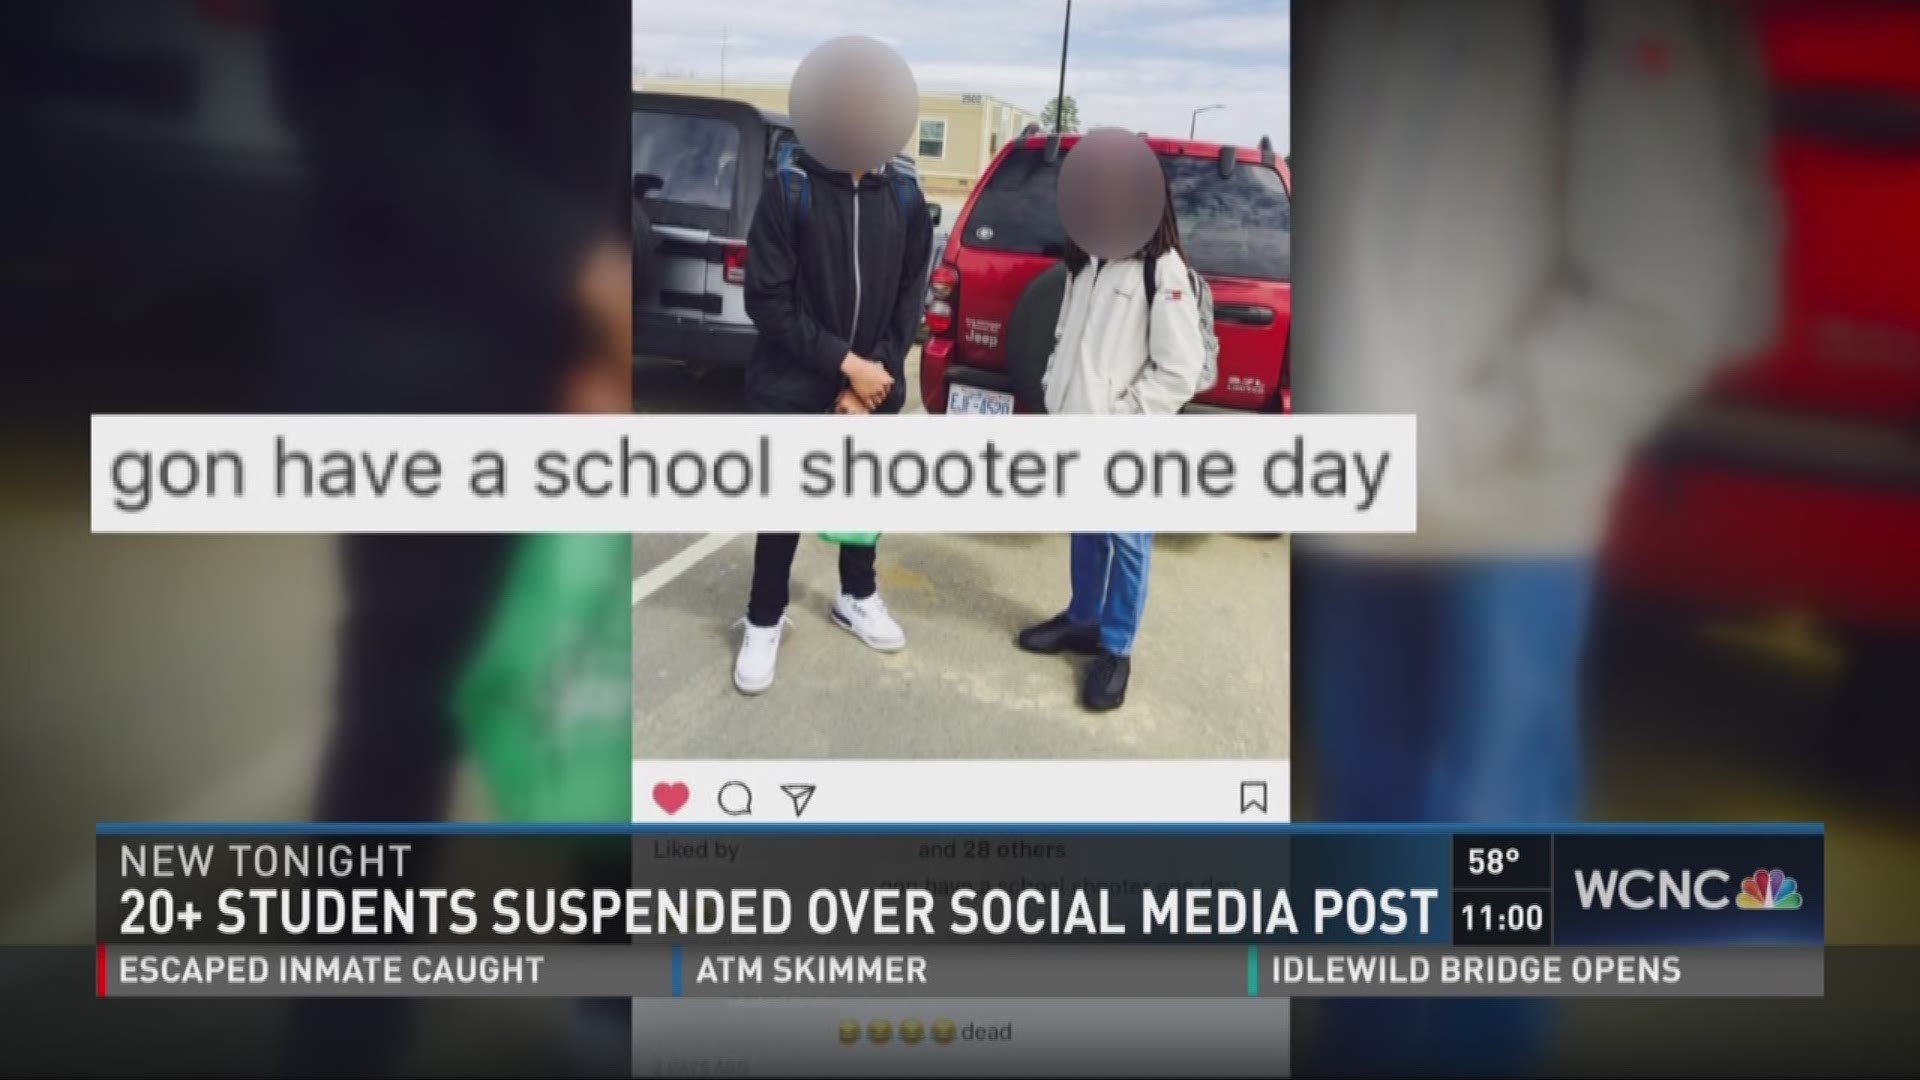 More than twenty local students were reportedly suspended from school on Monday over a post on social media. The post in question references a school shooting, but there was no specific threat.